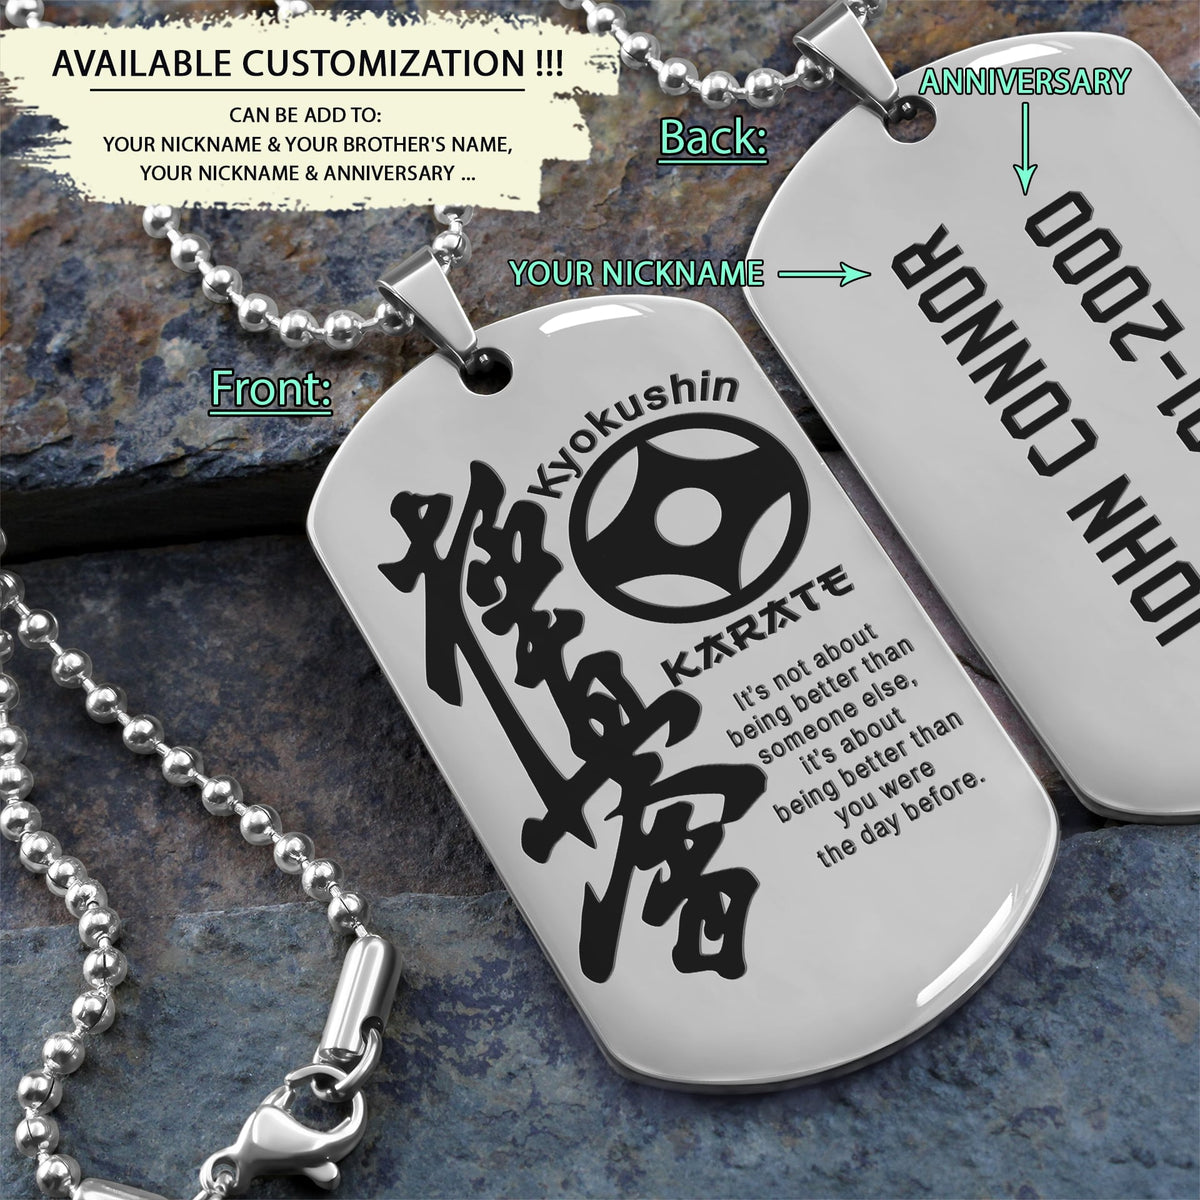 KAD010 - It’s Not About Being Better Than Someone Else - It’s About Being Better Than You Were The Day Before - Kyokushin Karate - Engrave Silver Dogtag